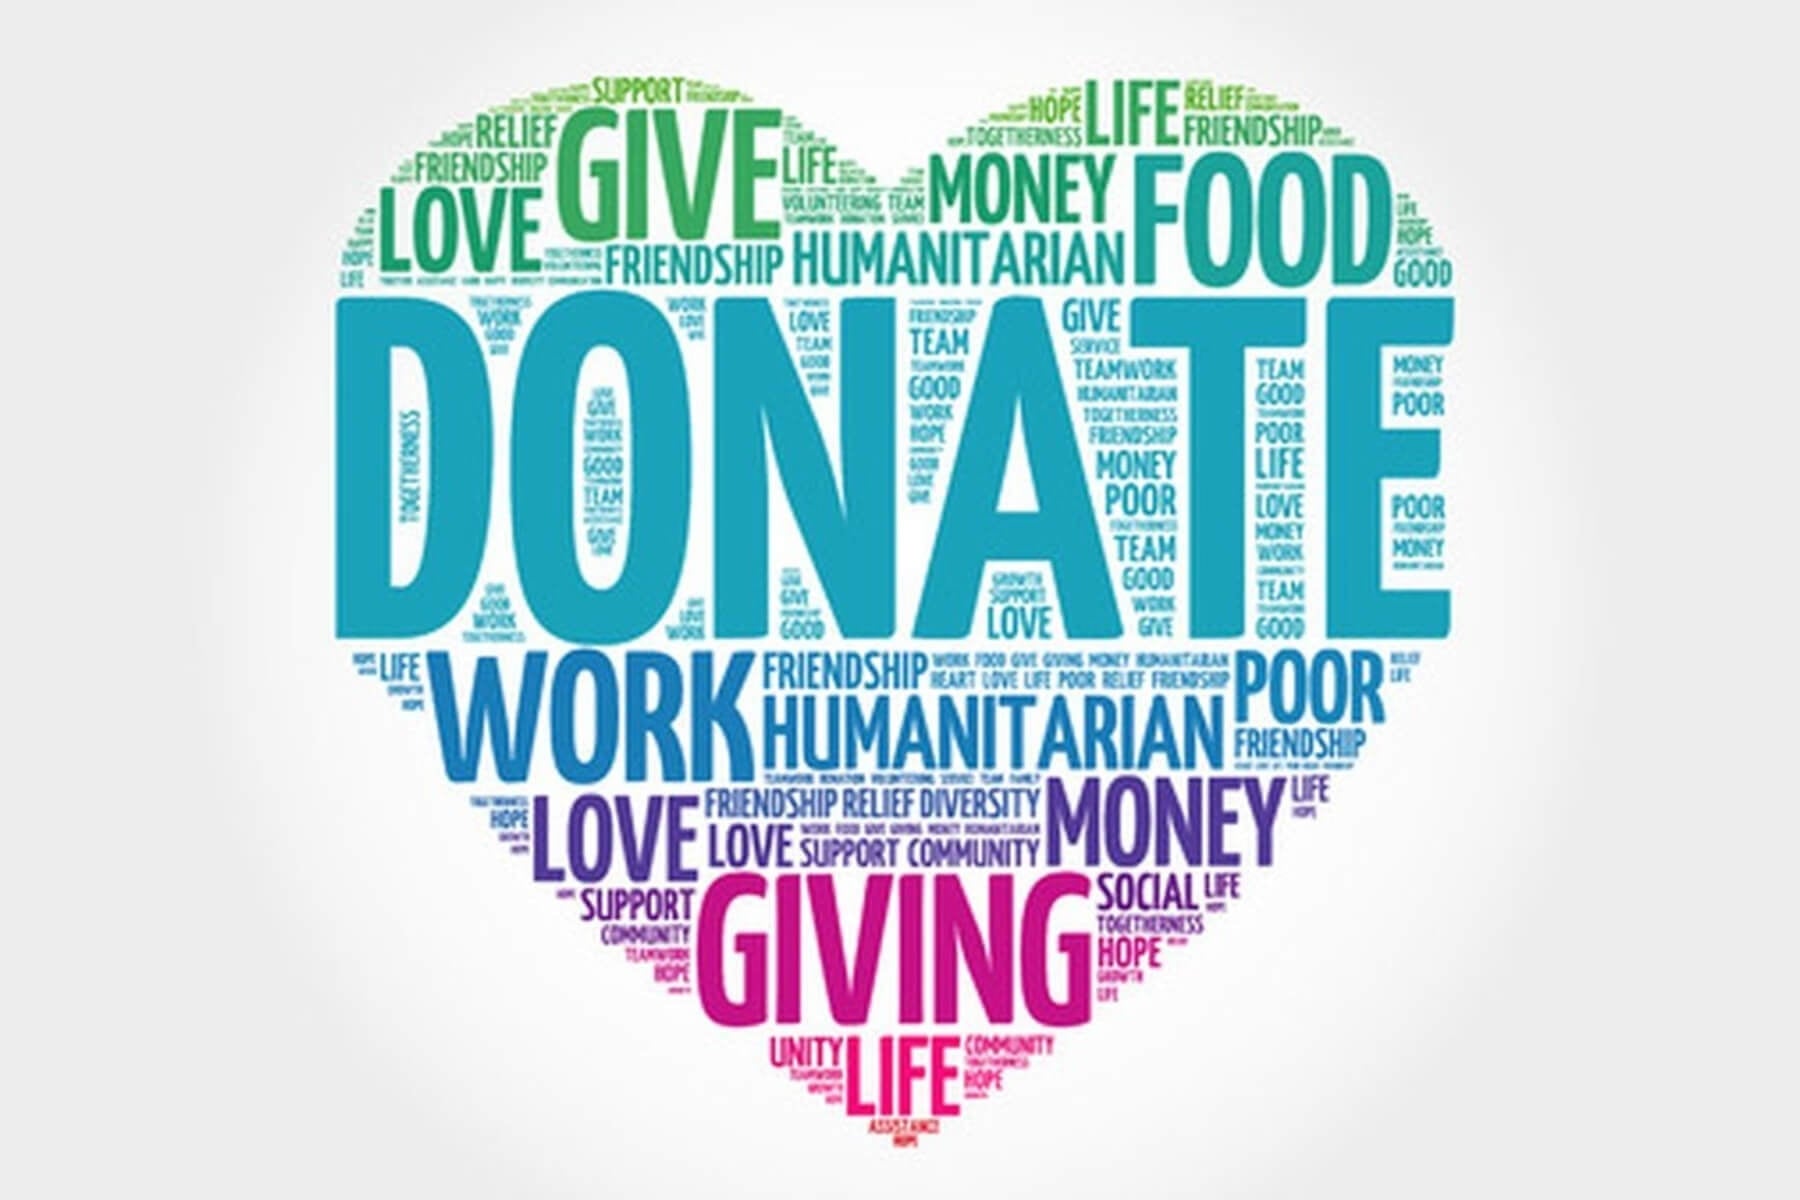 charities-and-non-profit-organizations-can-help